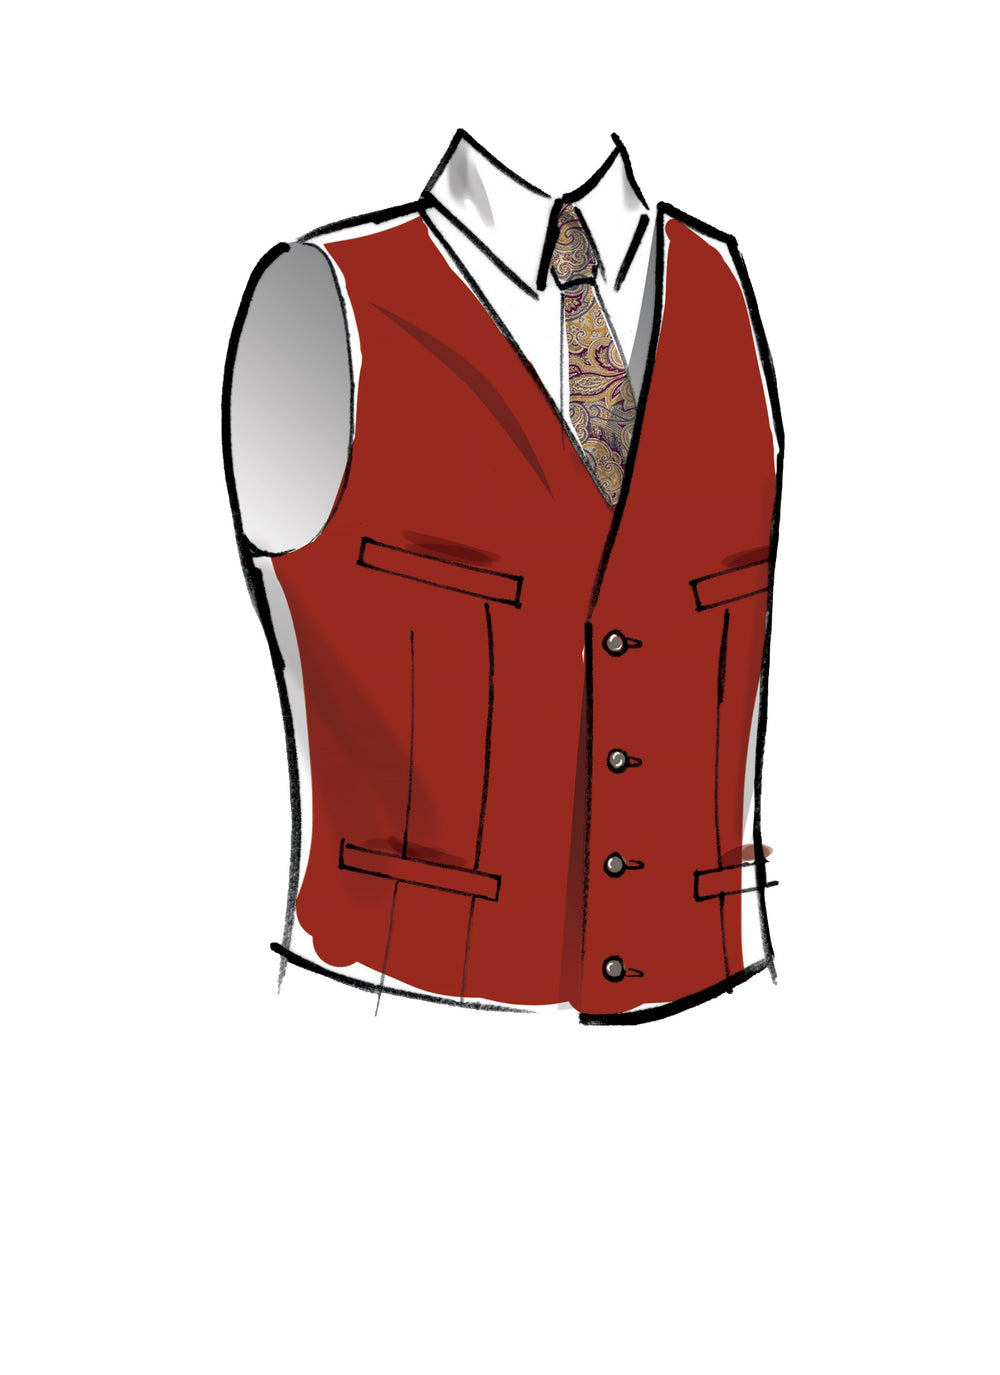 McCall's 8133 COSTUME pattern | Men's Historical Waistcoat from Jaycotts Sewing Supplies